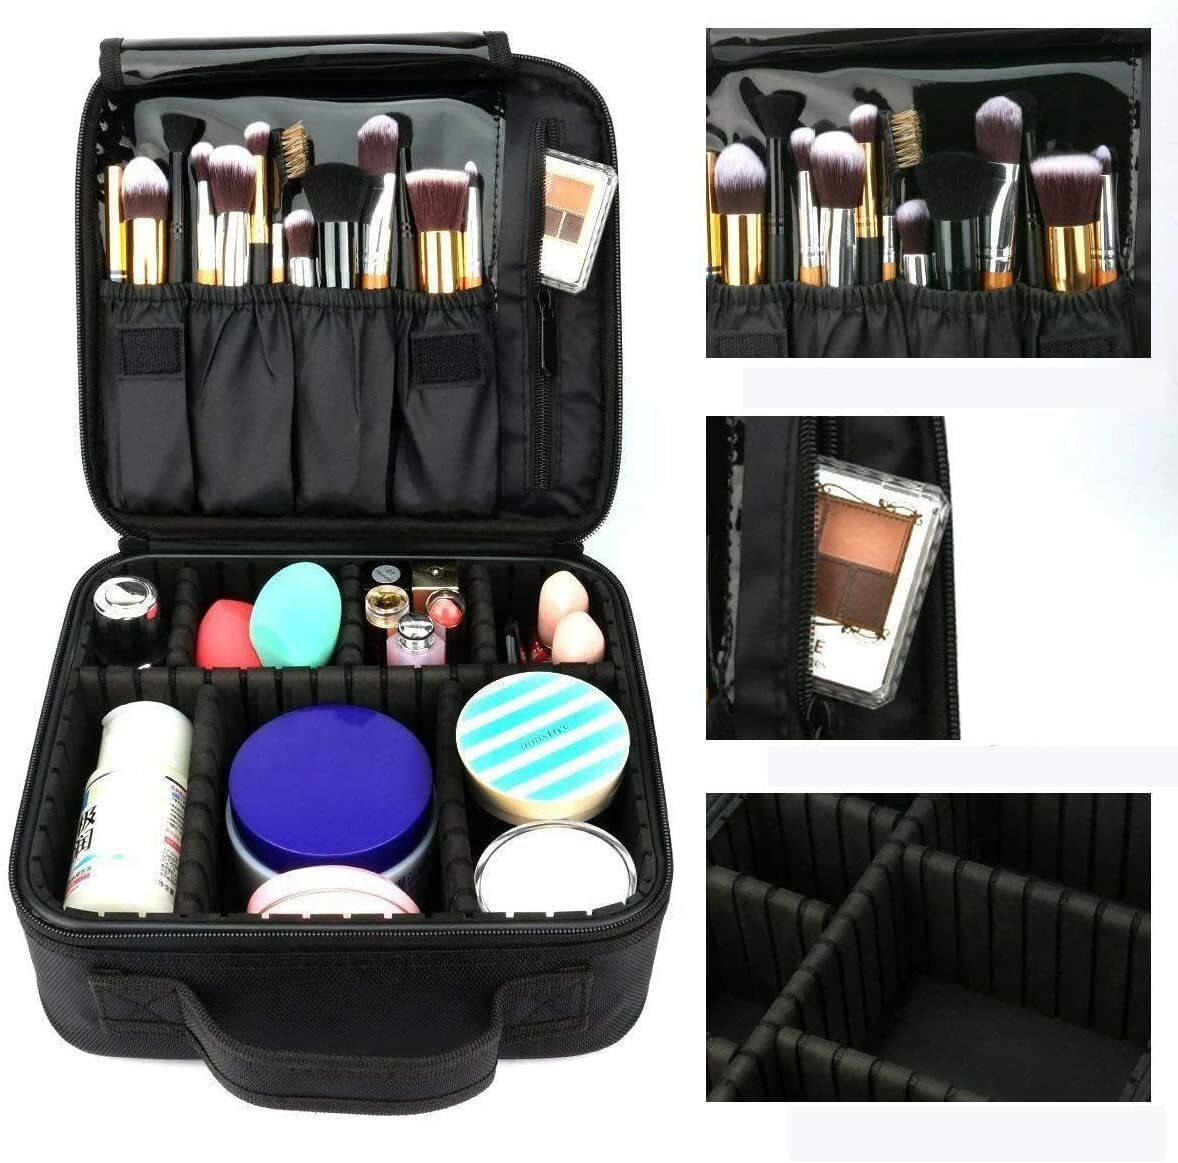 Generic Travel Makeup Bag, Portable Travel Makeup Cosmetic Case Organizer Artist Storage Bag With Adjustable Dividers For Cosmetics Makeup Brushes Toiletry Jewelry Digital Accessories